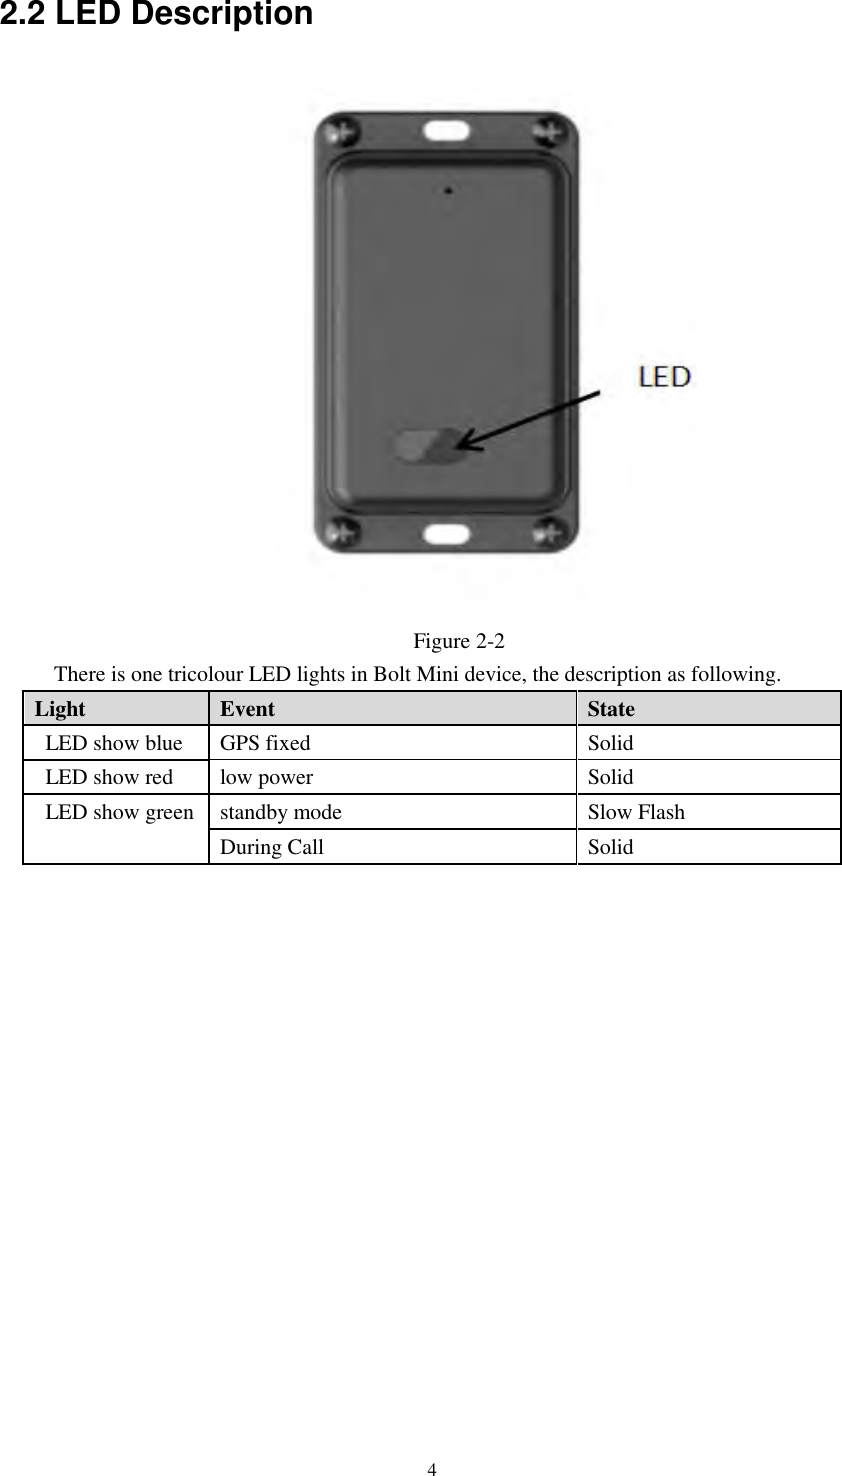 42.2 LED Description Figure 2-2 There is one tricolour LED lights in Bolt Mini device, the description as following.  Light  Event  State  LED show blue  GPS fixed   Solid  LED show red  low power  Solid  LED show green standby mode  Slow Flash  During Call  Solid 